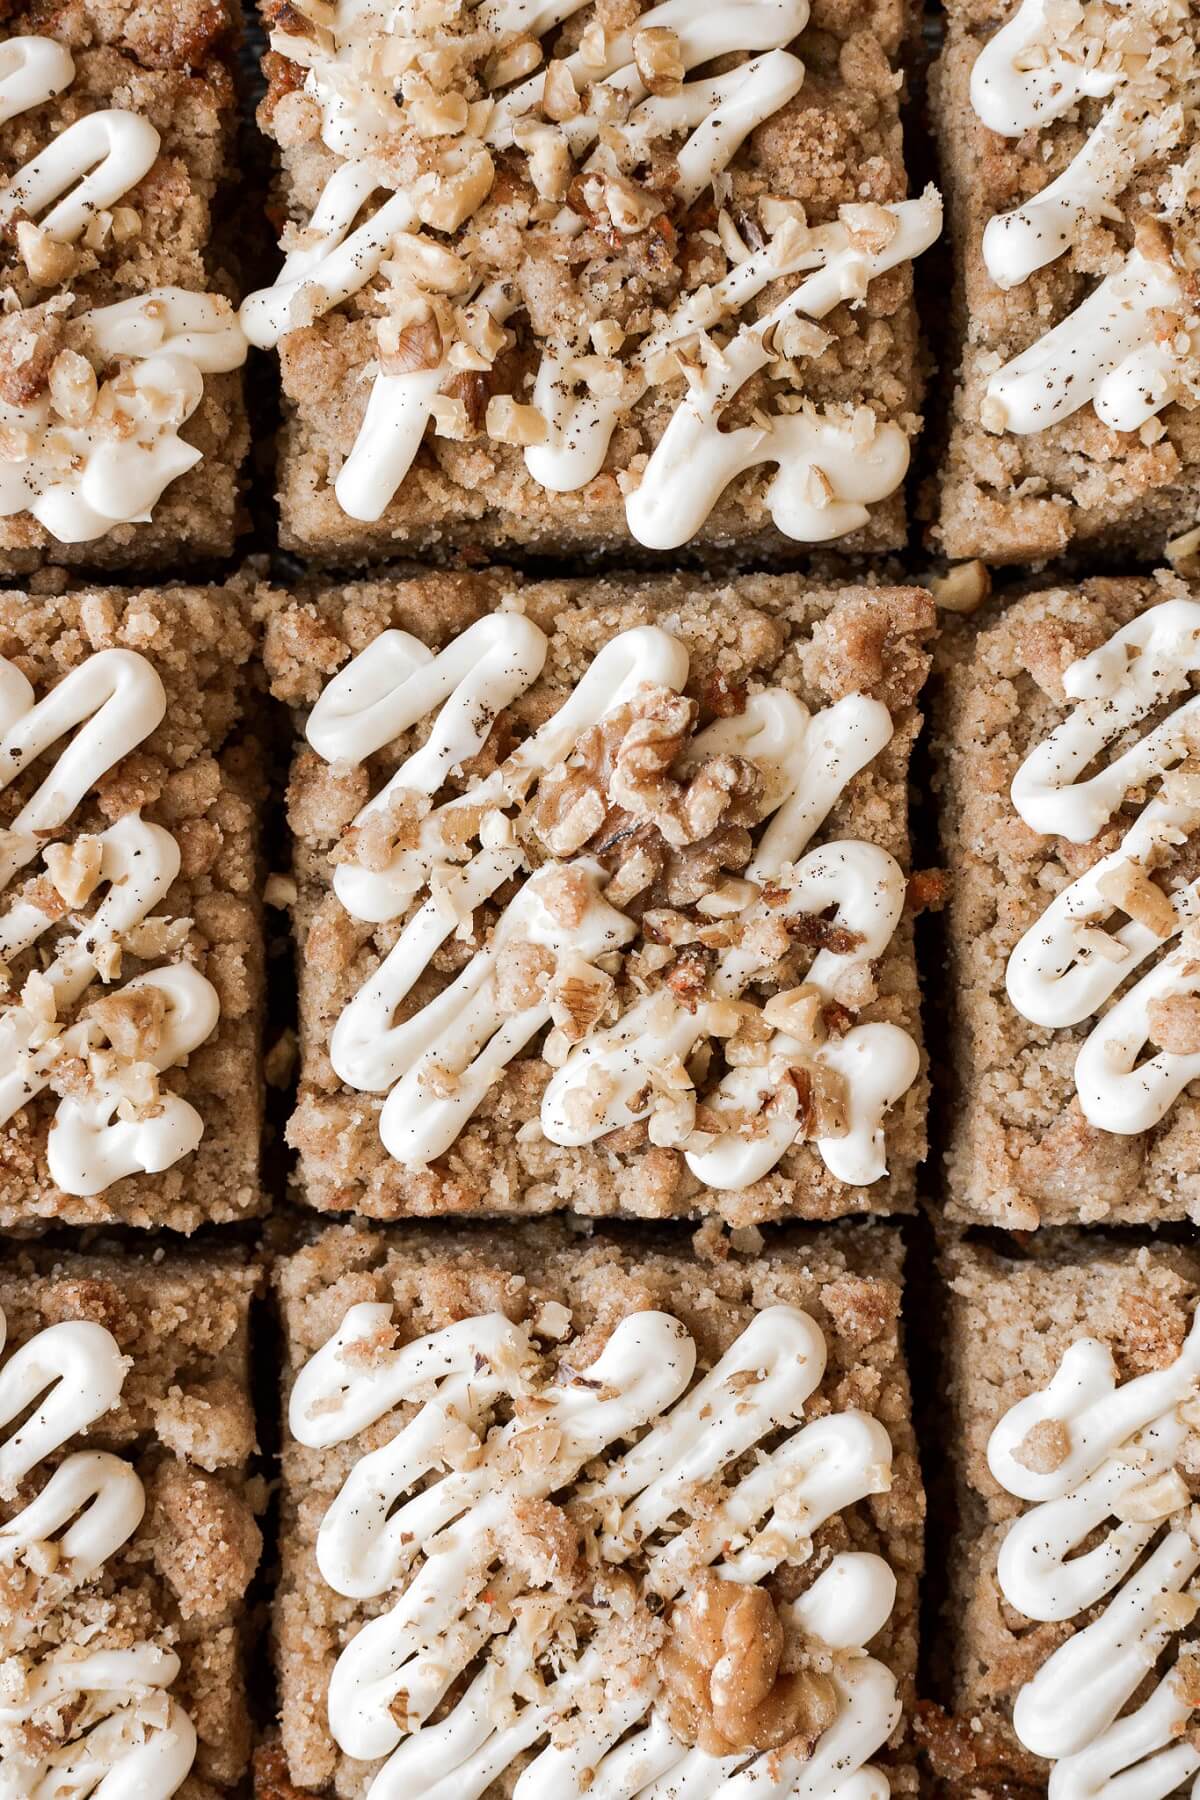 Cream cheese icing and walnuts on squares of carrot crumb cake.